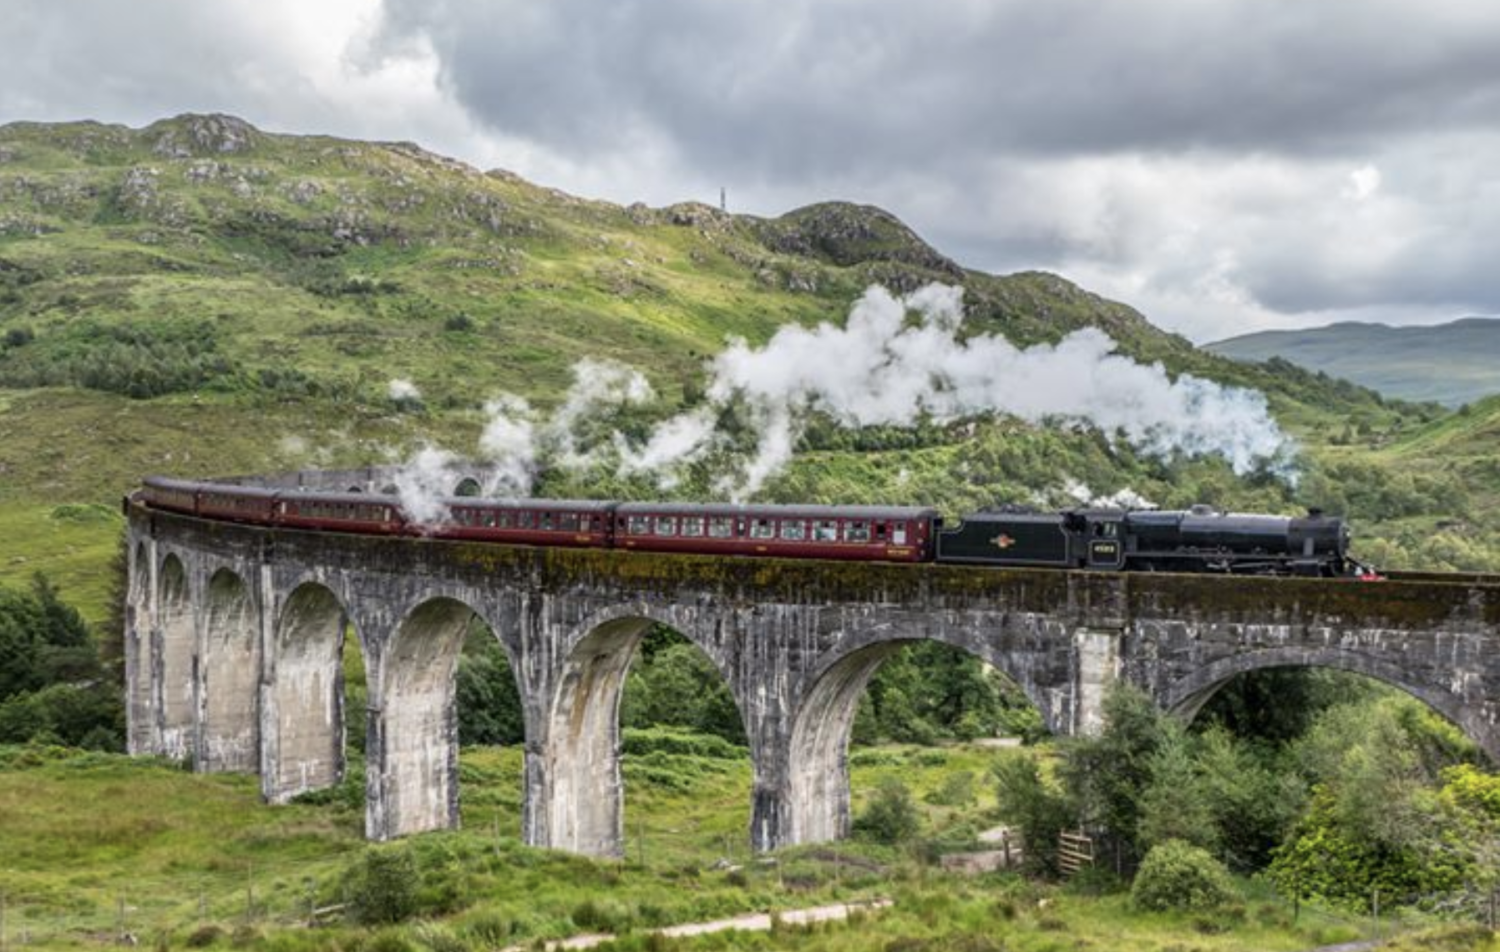 The Jacobite train, also known as the Hogwarts Express, crosses a bridge in Scotland